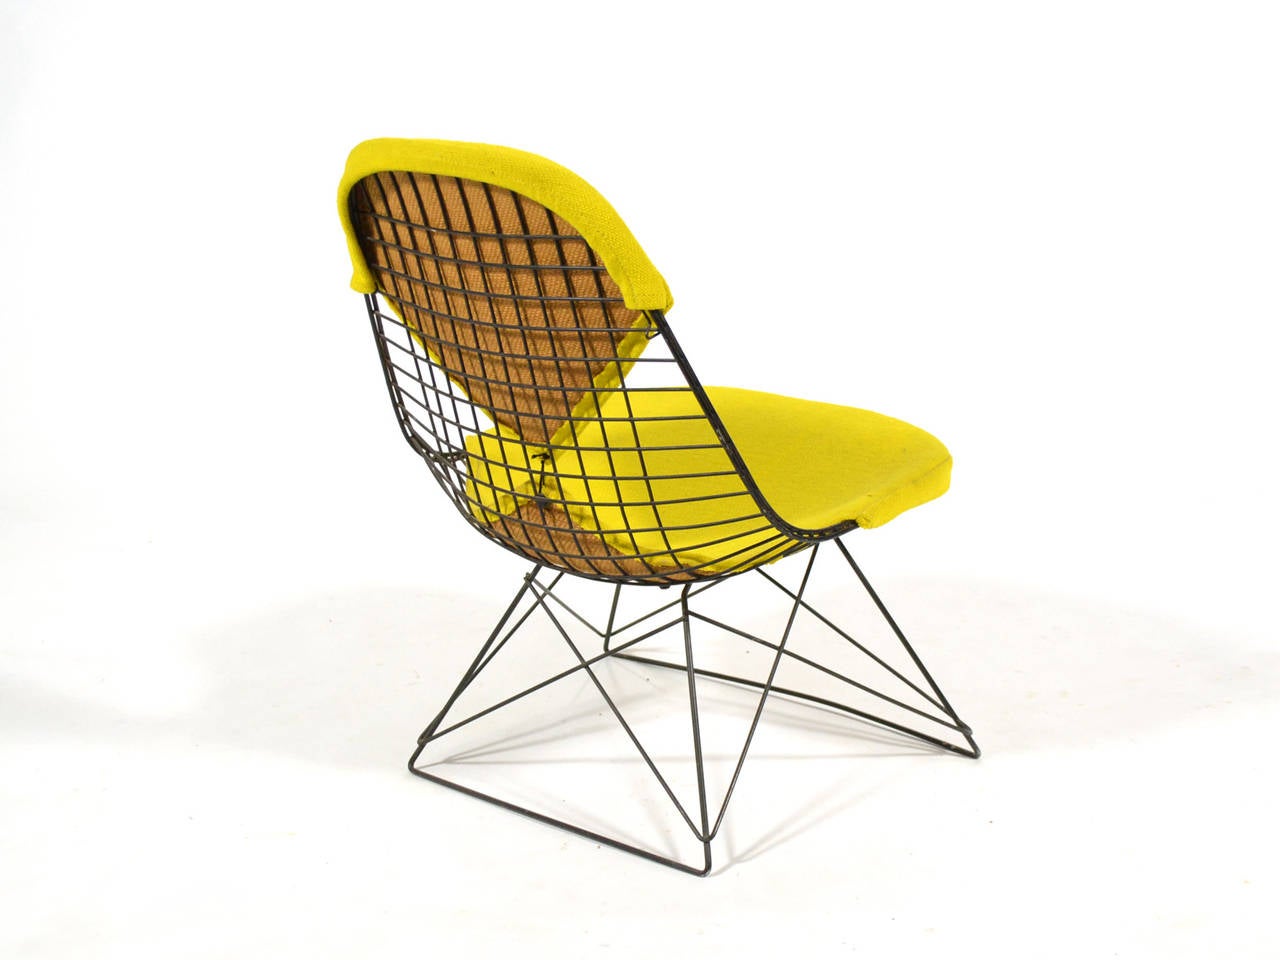 Mid-20th Century Early Charles and Ray Eames LKR-2 Lounge Chair by Herman Miller